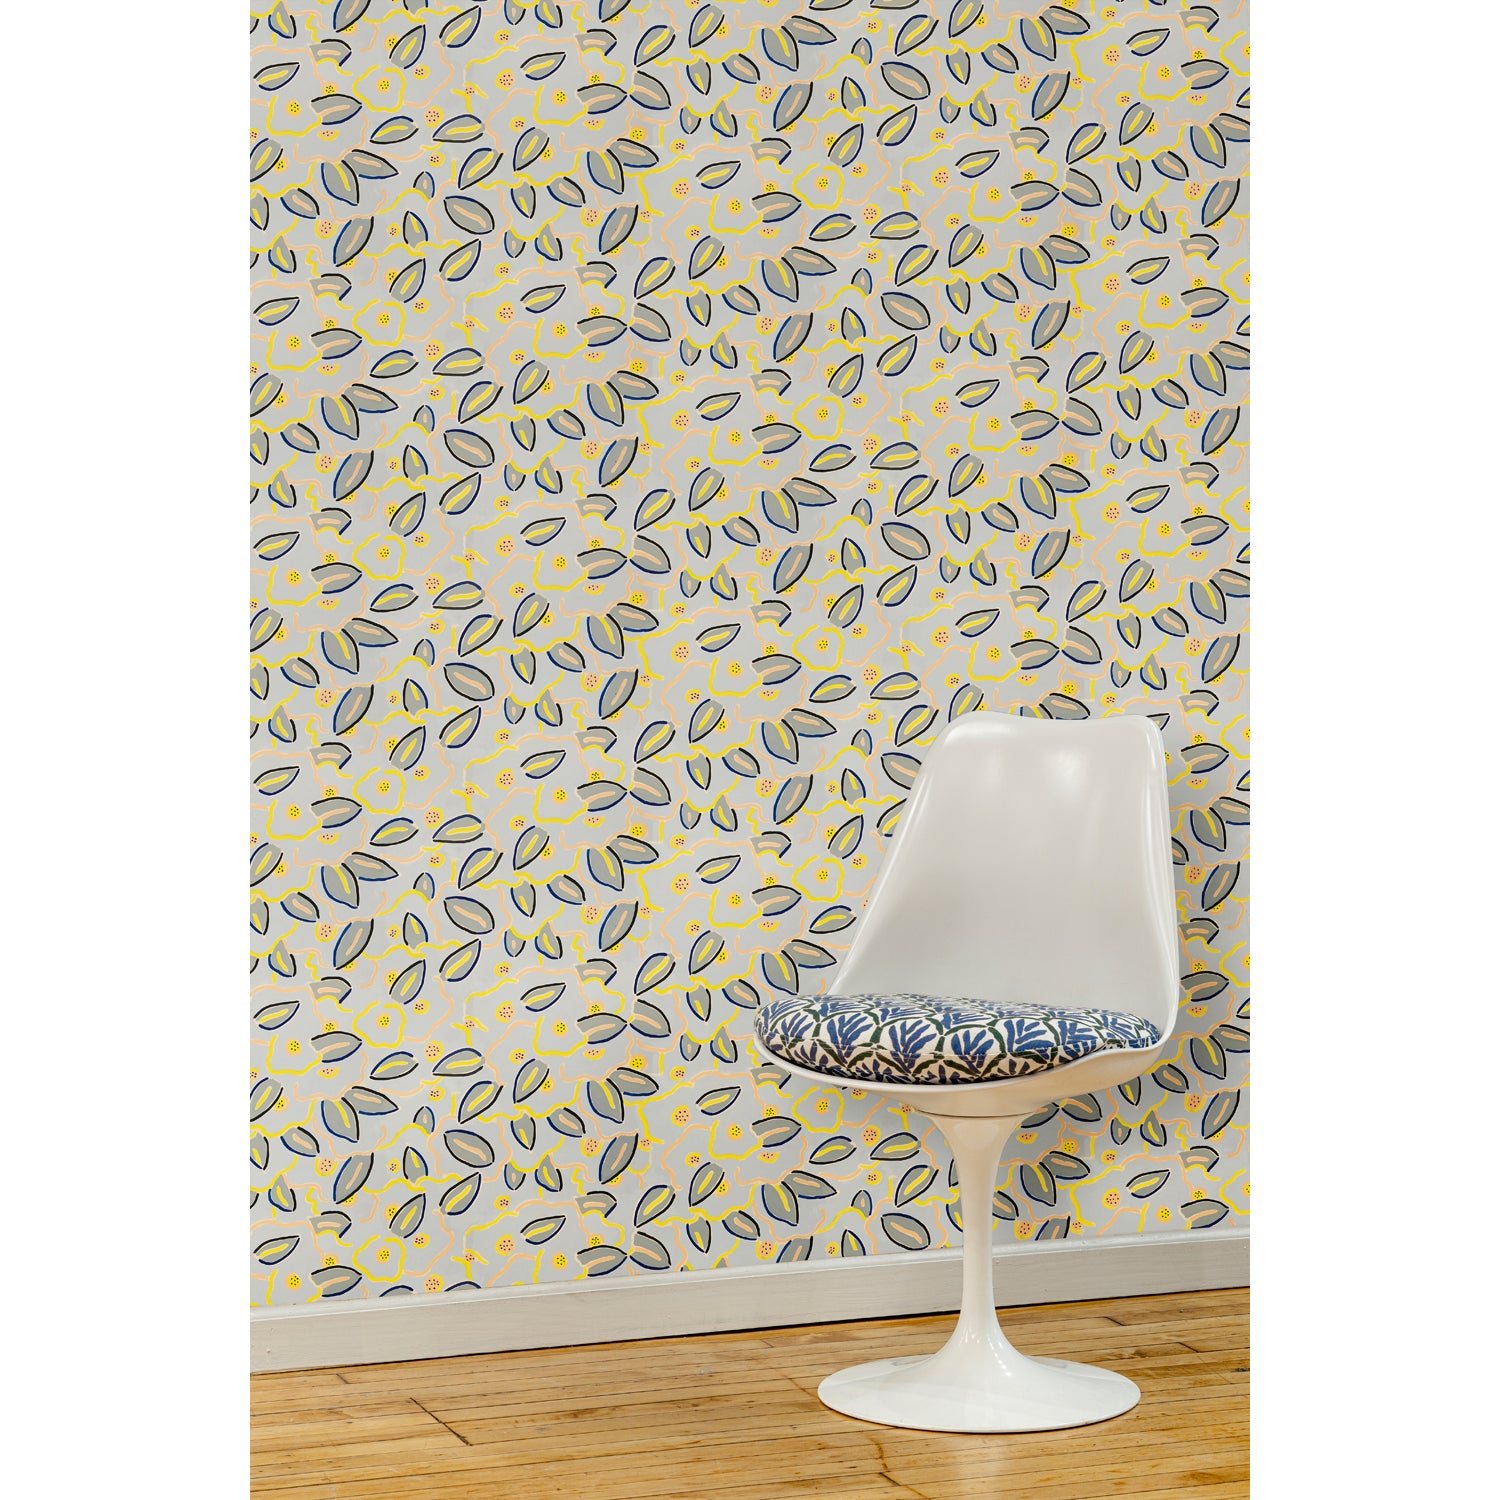  A white swivel chair in front of a wall papered in a large-scale minimal floral print in shades of navy, yellow and pink on a gray-blue background.